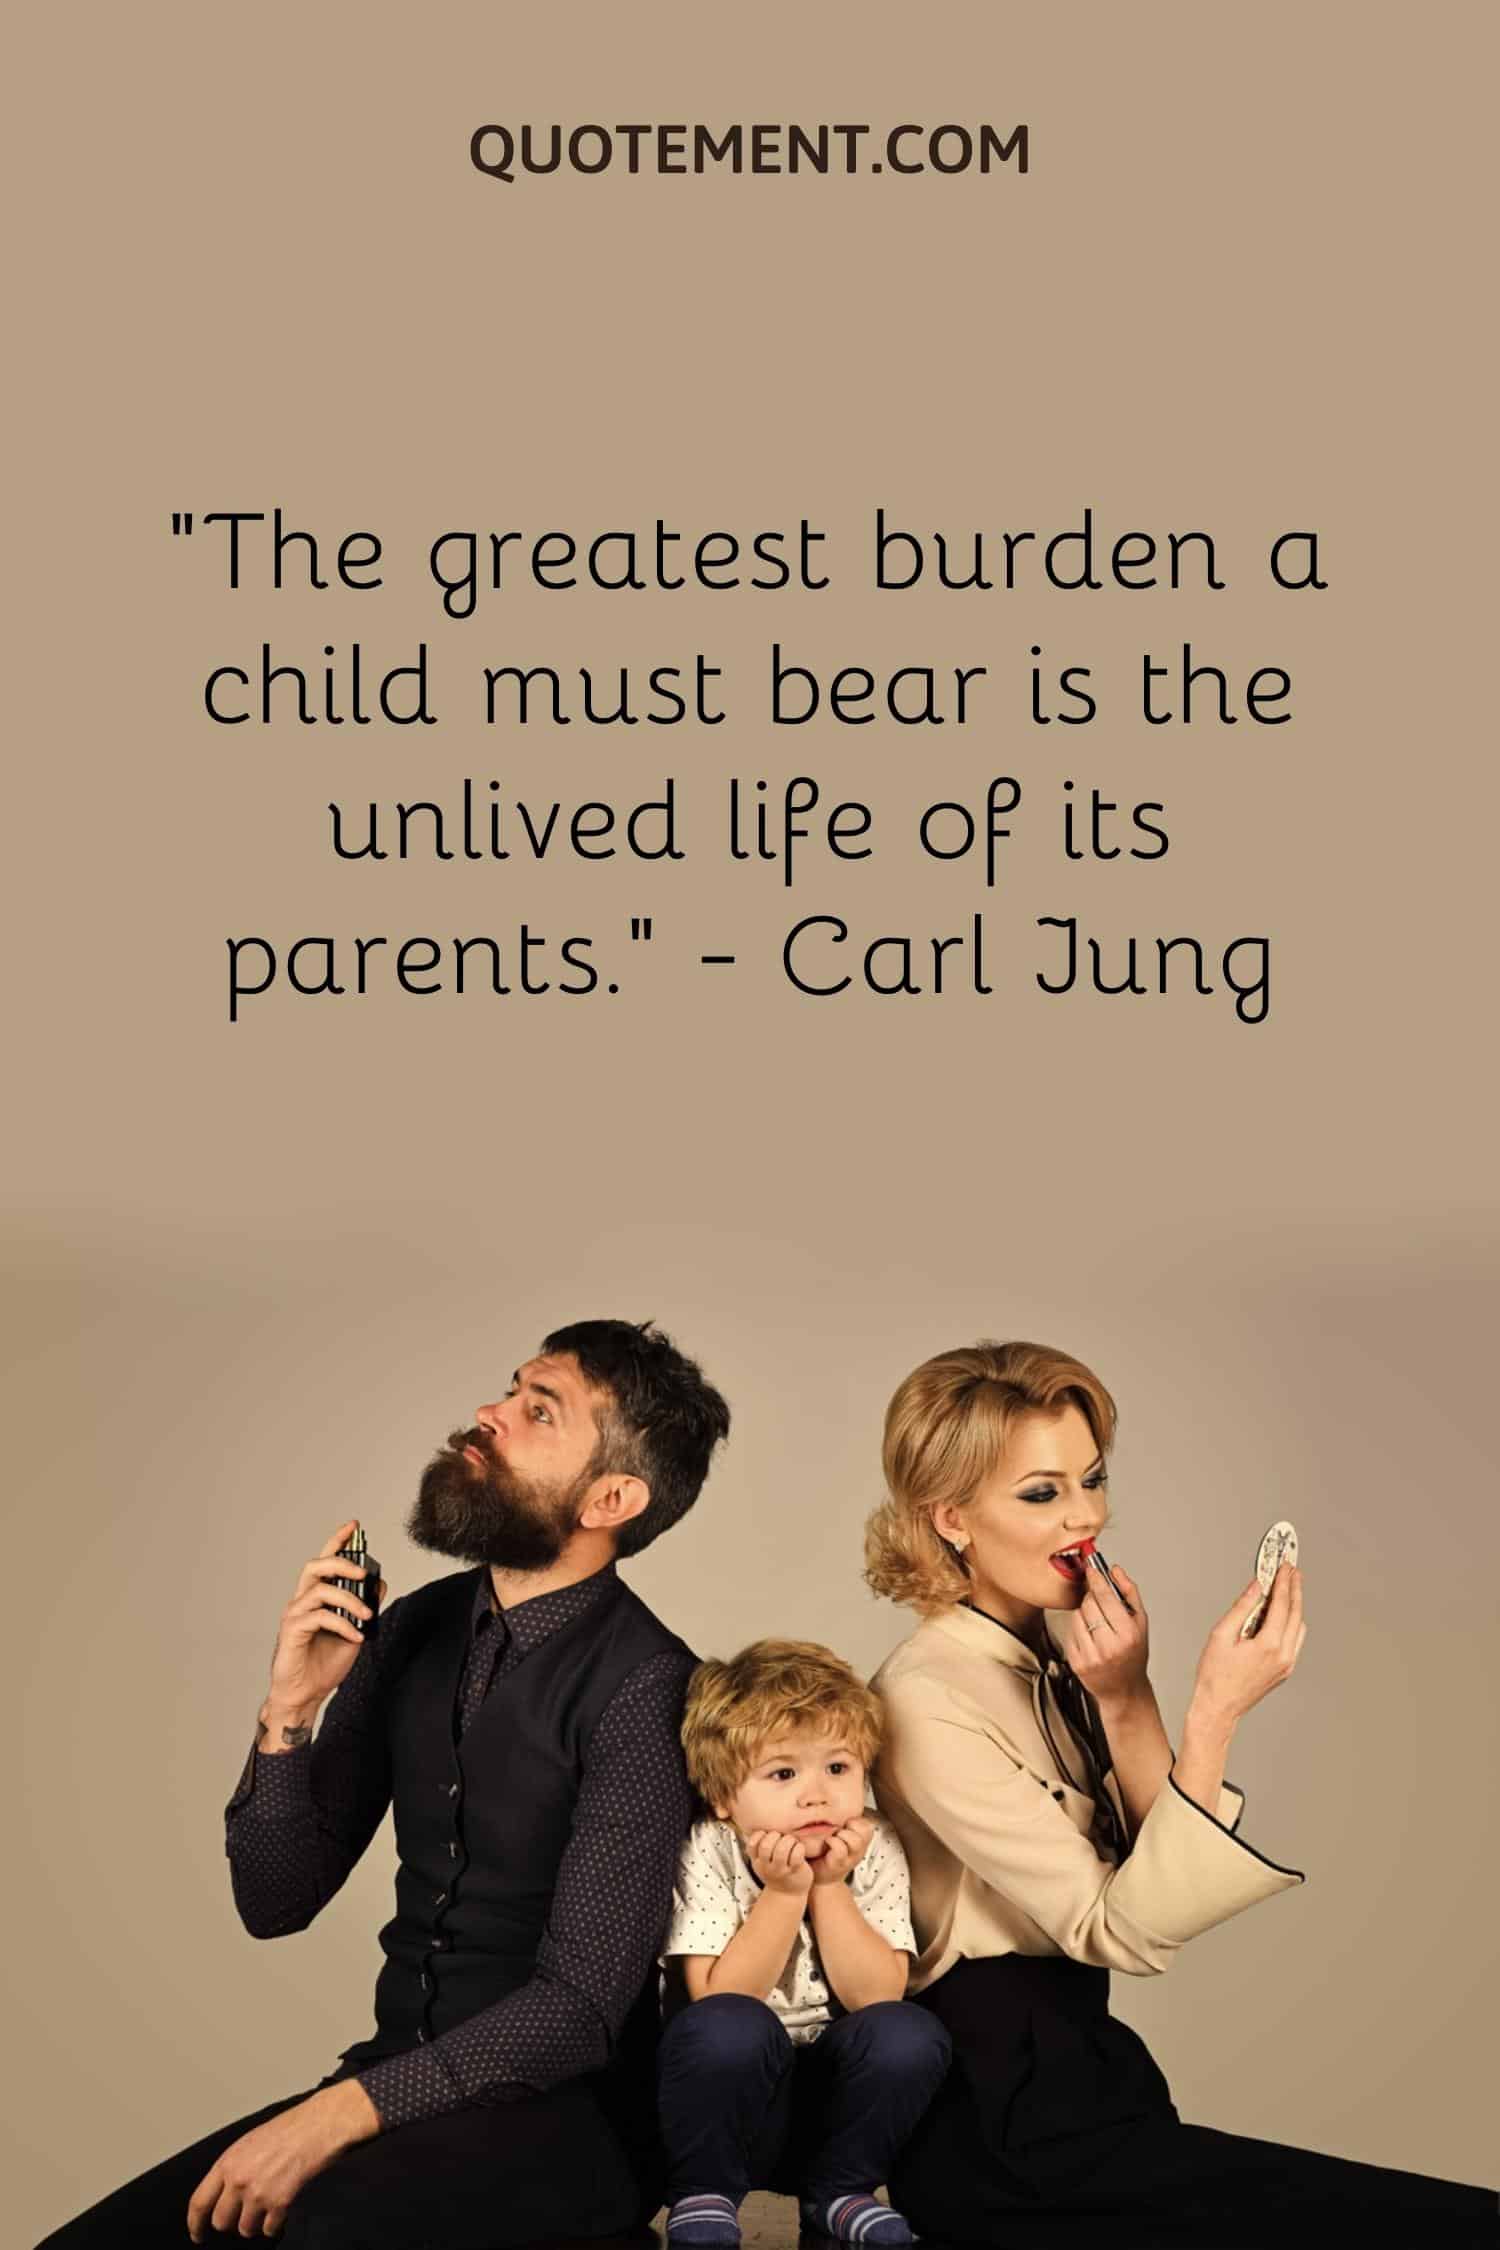 The greatest burden a child must bear is the unlived life of its parents